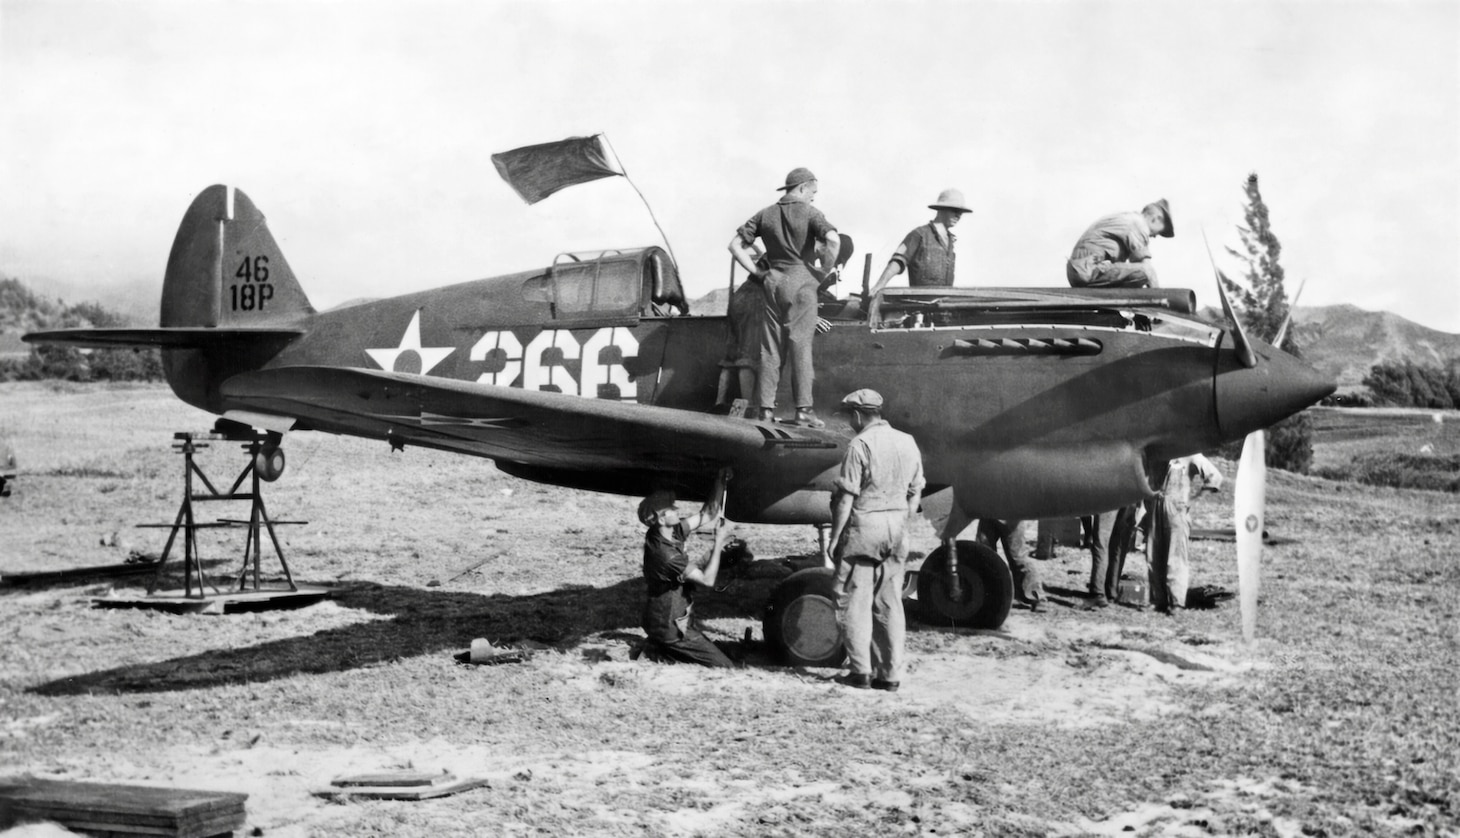 This early P-40 is from the 18th Pursuit Group, and the ground crew is bore-sighting its twin nose-mounted .50-caliber machine guns at Bellows Field sometime in the summer or fall of 1941. This procedure ensures the guns’ bullets converge at a desired range.